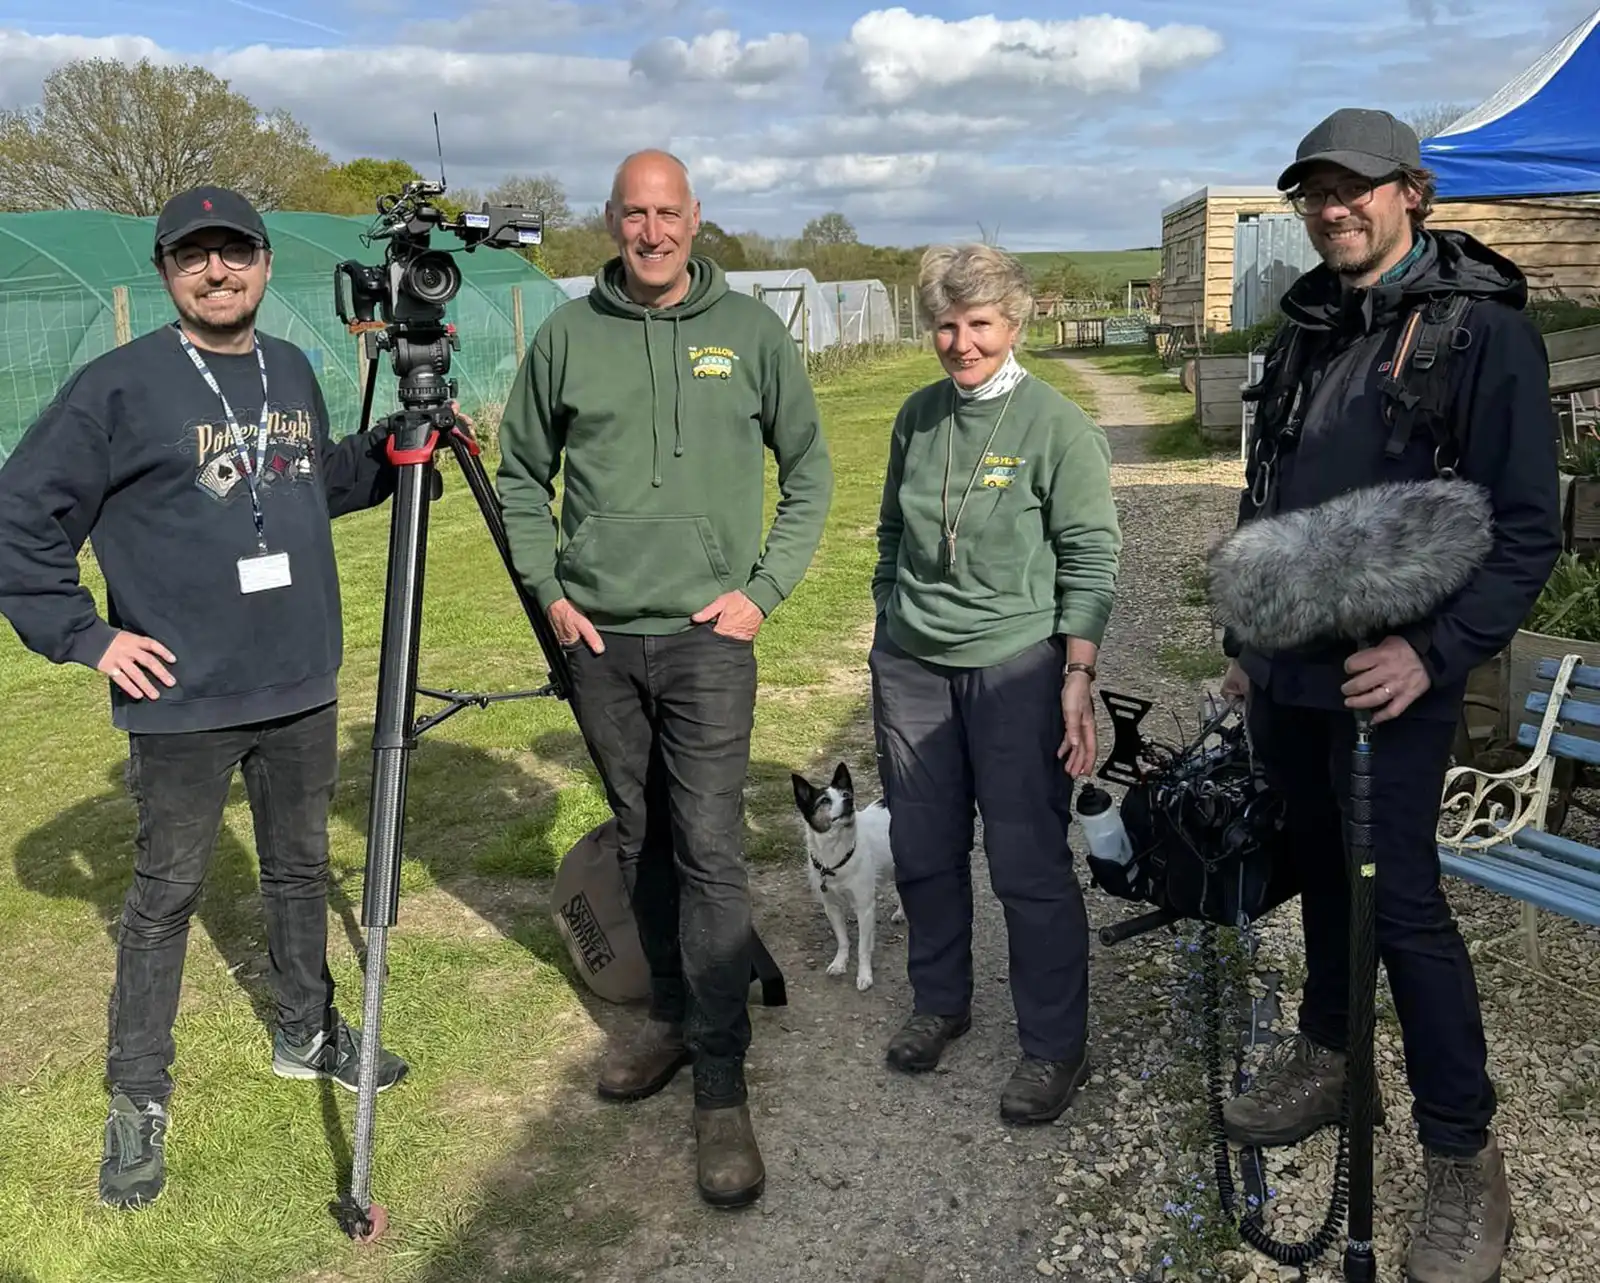 Members of the TV crew with charity staff at Shillingstone